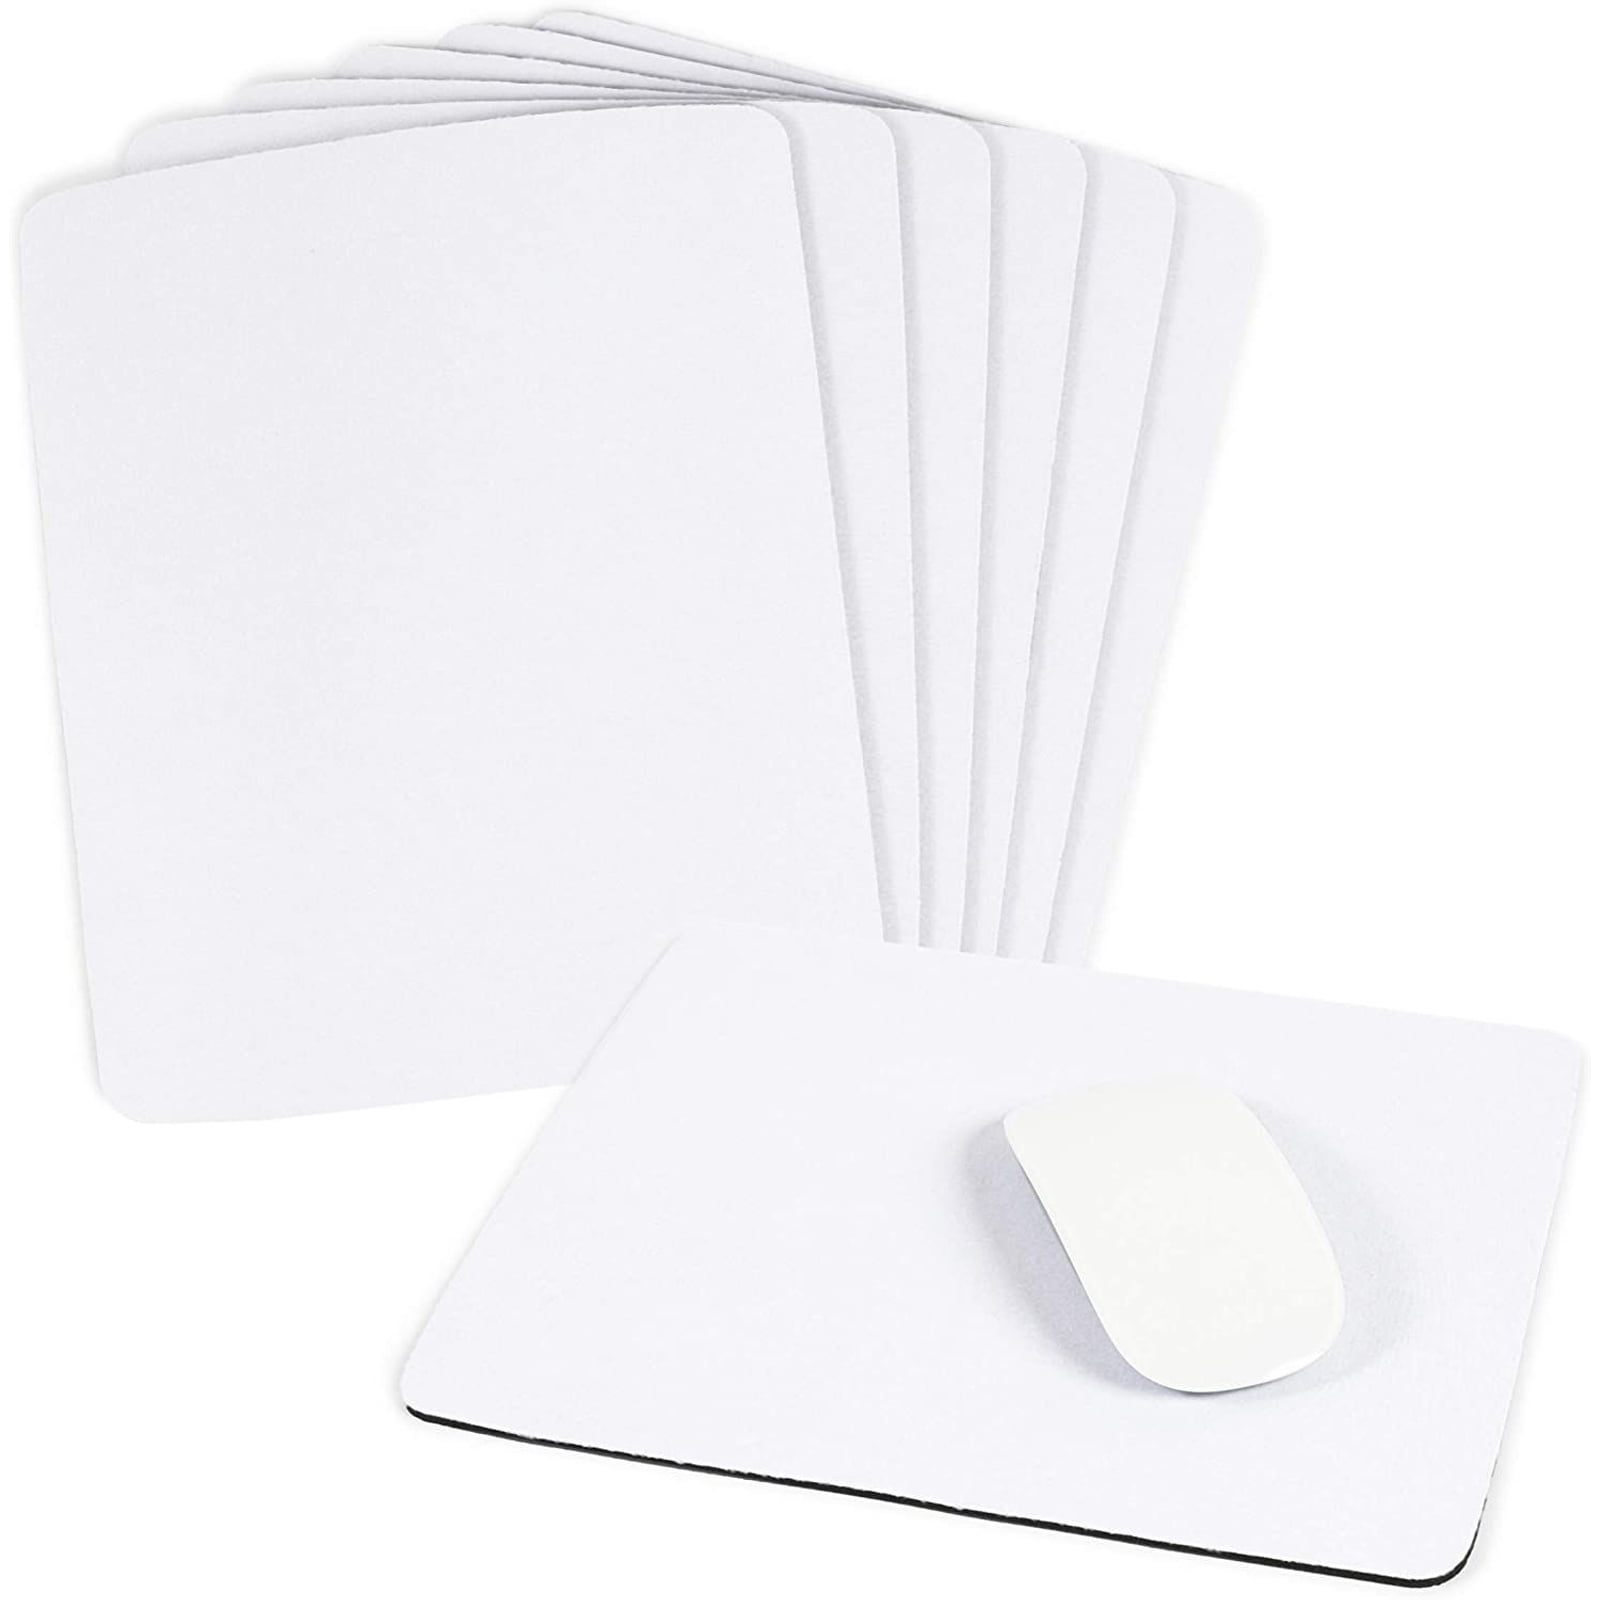 Blank White Heat Transfer Print Fabric Mouse Mat Pad For Sublimation Printing 